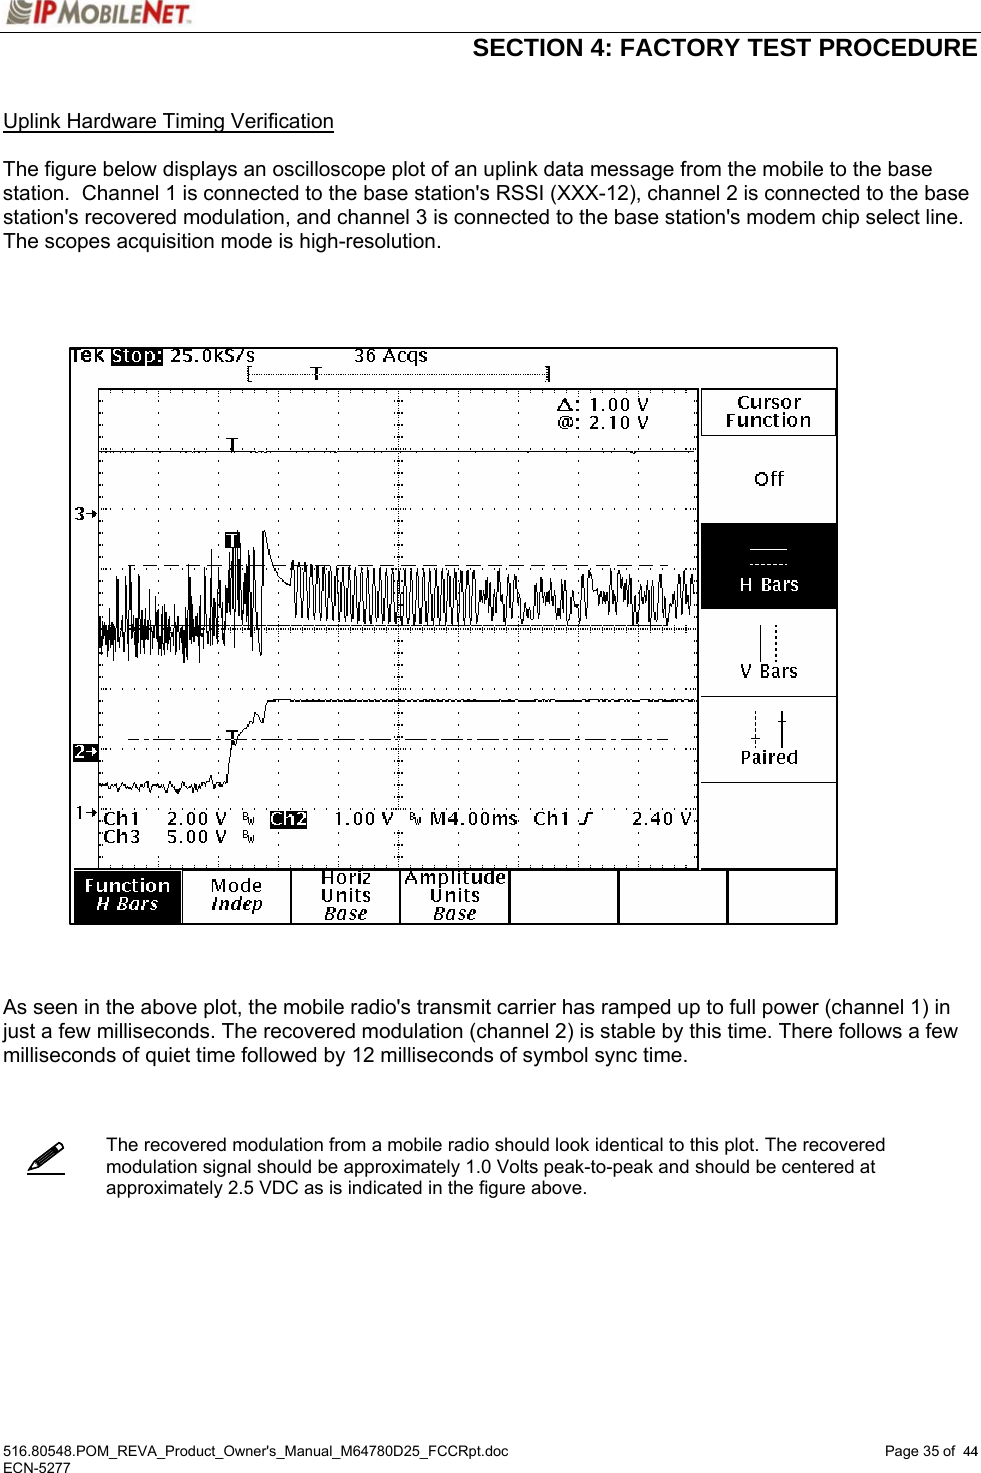  SECTION 4: FACTORY TEST PROCEDURE  516.80548.POM_REVA_Product_Owner&apos;s_Manual_M64780D25_FCCRpt.doc Page 35 of  44 ECN-5277  44   Uplink Hardware Timing Verification  The figure below displays an oscilloscope plot of an uplink data message from the mobile to the base station.  Channel 1 is connected to the base station&apos;s RSSI (XXX-12), channel 2 is connected to the base station&apos;s recovered modulation, and channel 3 is connected to the base station&apos;s modem chip select line.  The scopes acquisition mode is high-resolution.        As seen in the above plot, the mobile radio&apos;s transmit carrier has ramped up to full power (channel 1) in just a few milliseconds. The recovered modulation (channel 2) is stable by this time. There follows a few milliseconds of quiet time followed by 12 milliseconds of symbol sync time.     The recovered modulation from a mobile radio should look identical to this plot. The recovered modulation signal should be approximately 1.0 Volts peak-to-peak and should be centered at approximately 2.5 VDC as is indicated in the figure above.        